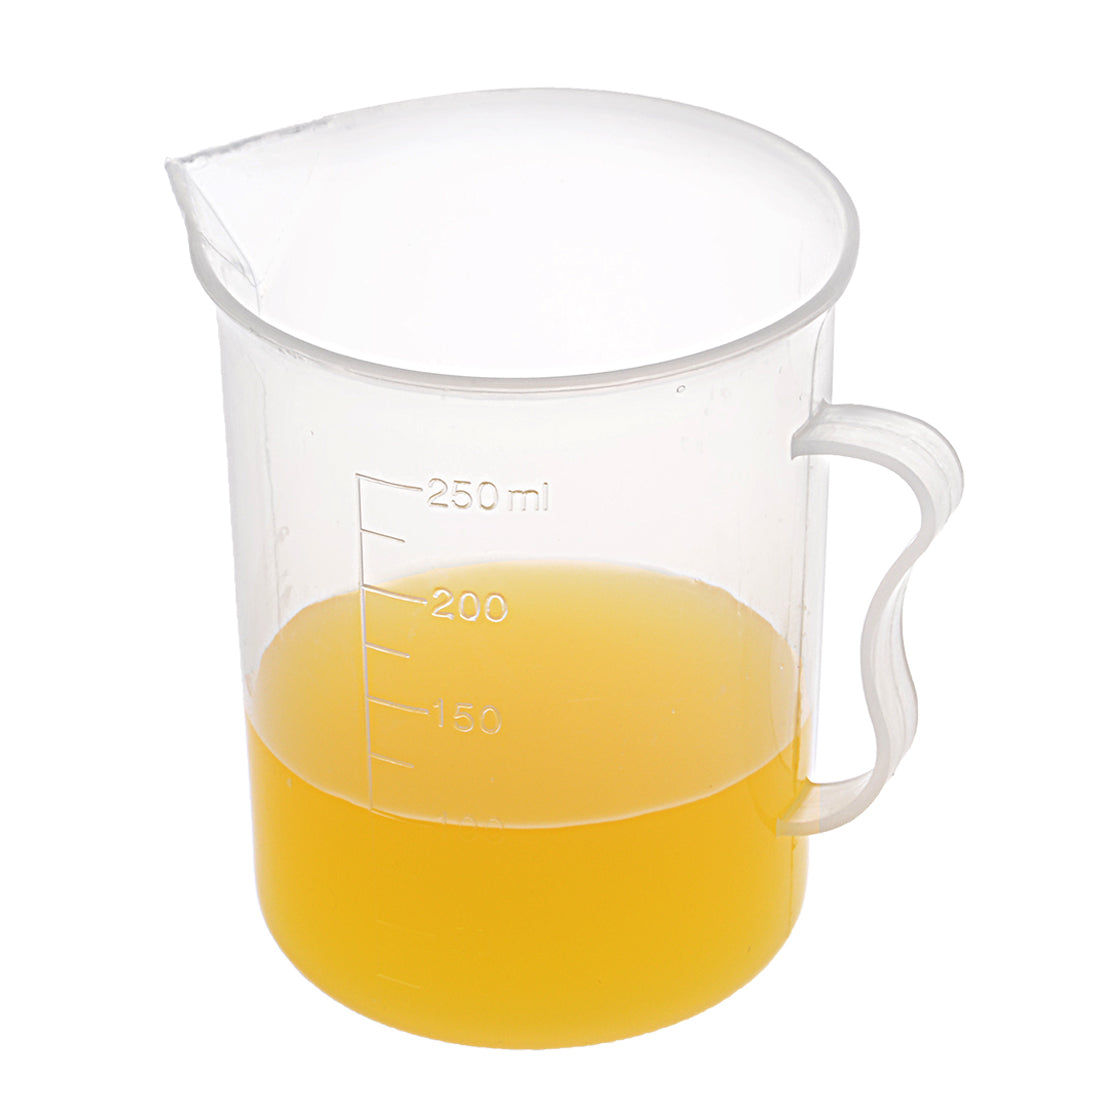 uxcell Uxcell Laboratory Transparent White PP 250mL Measuring Cup Handled Beaker